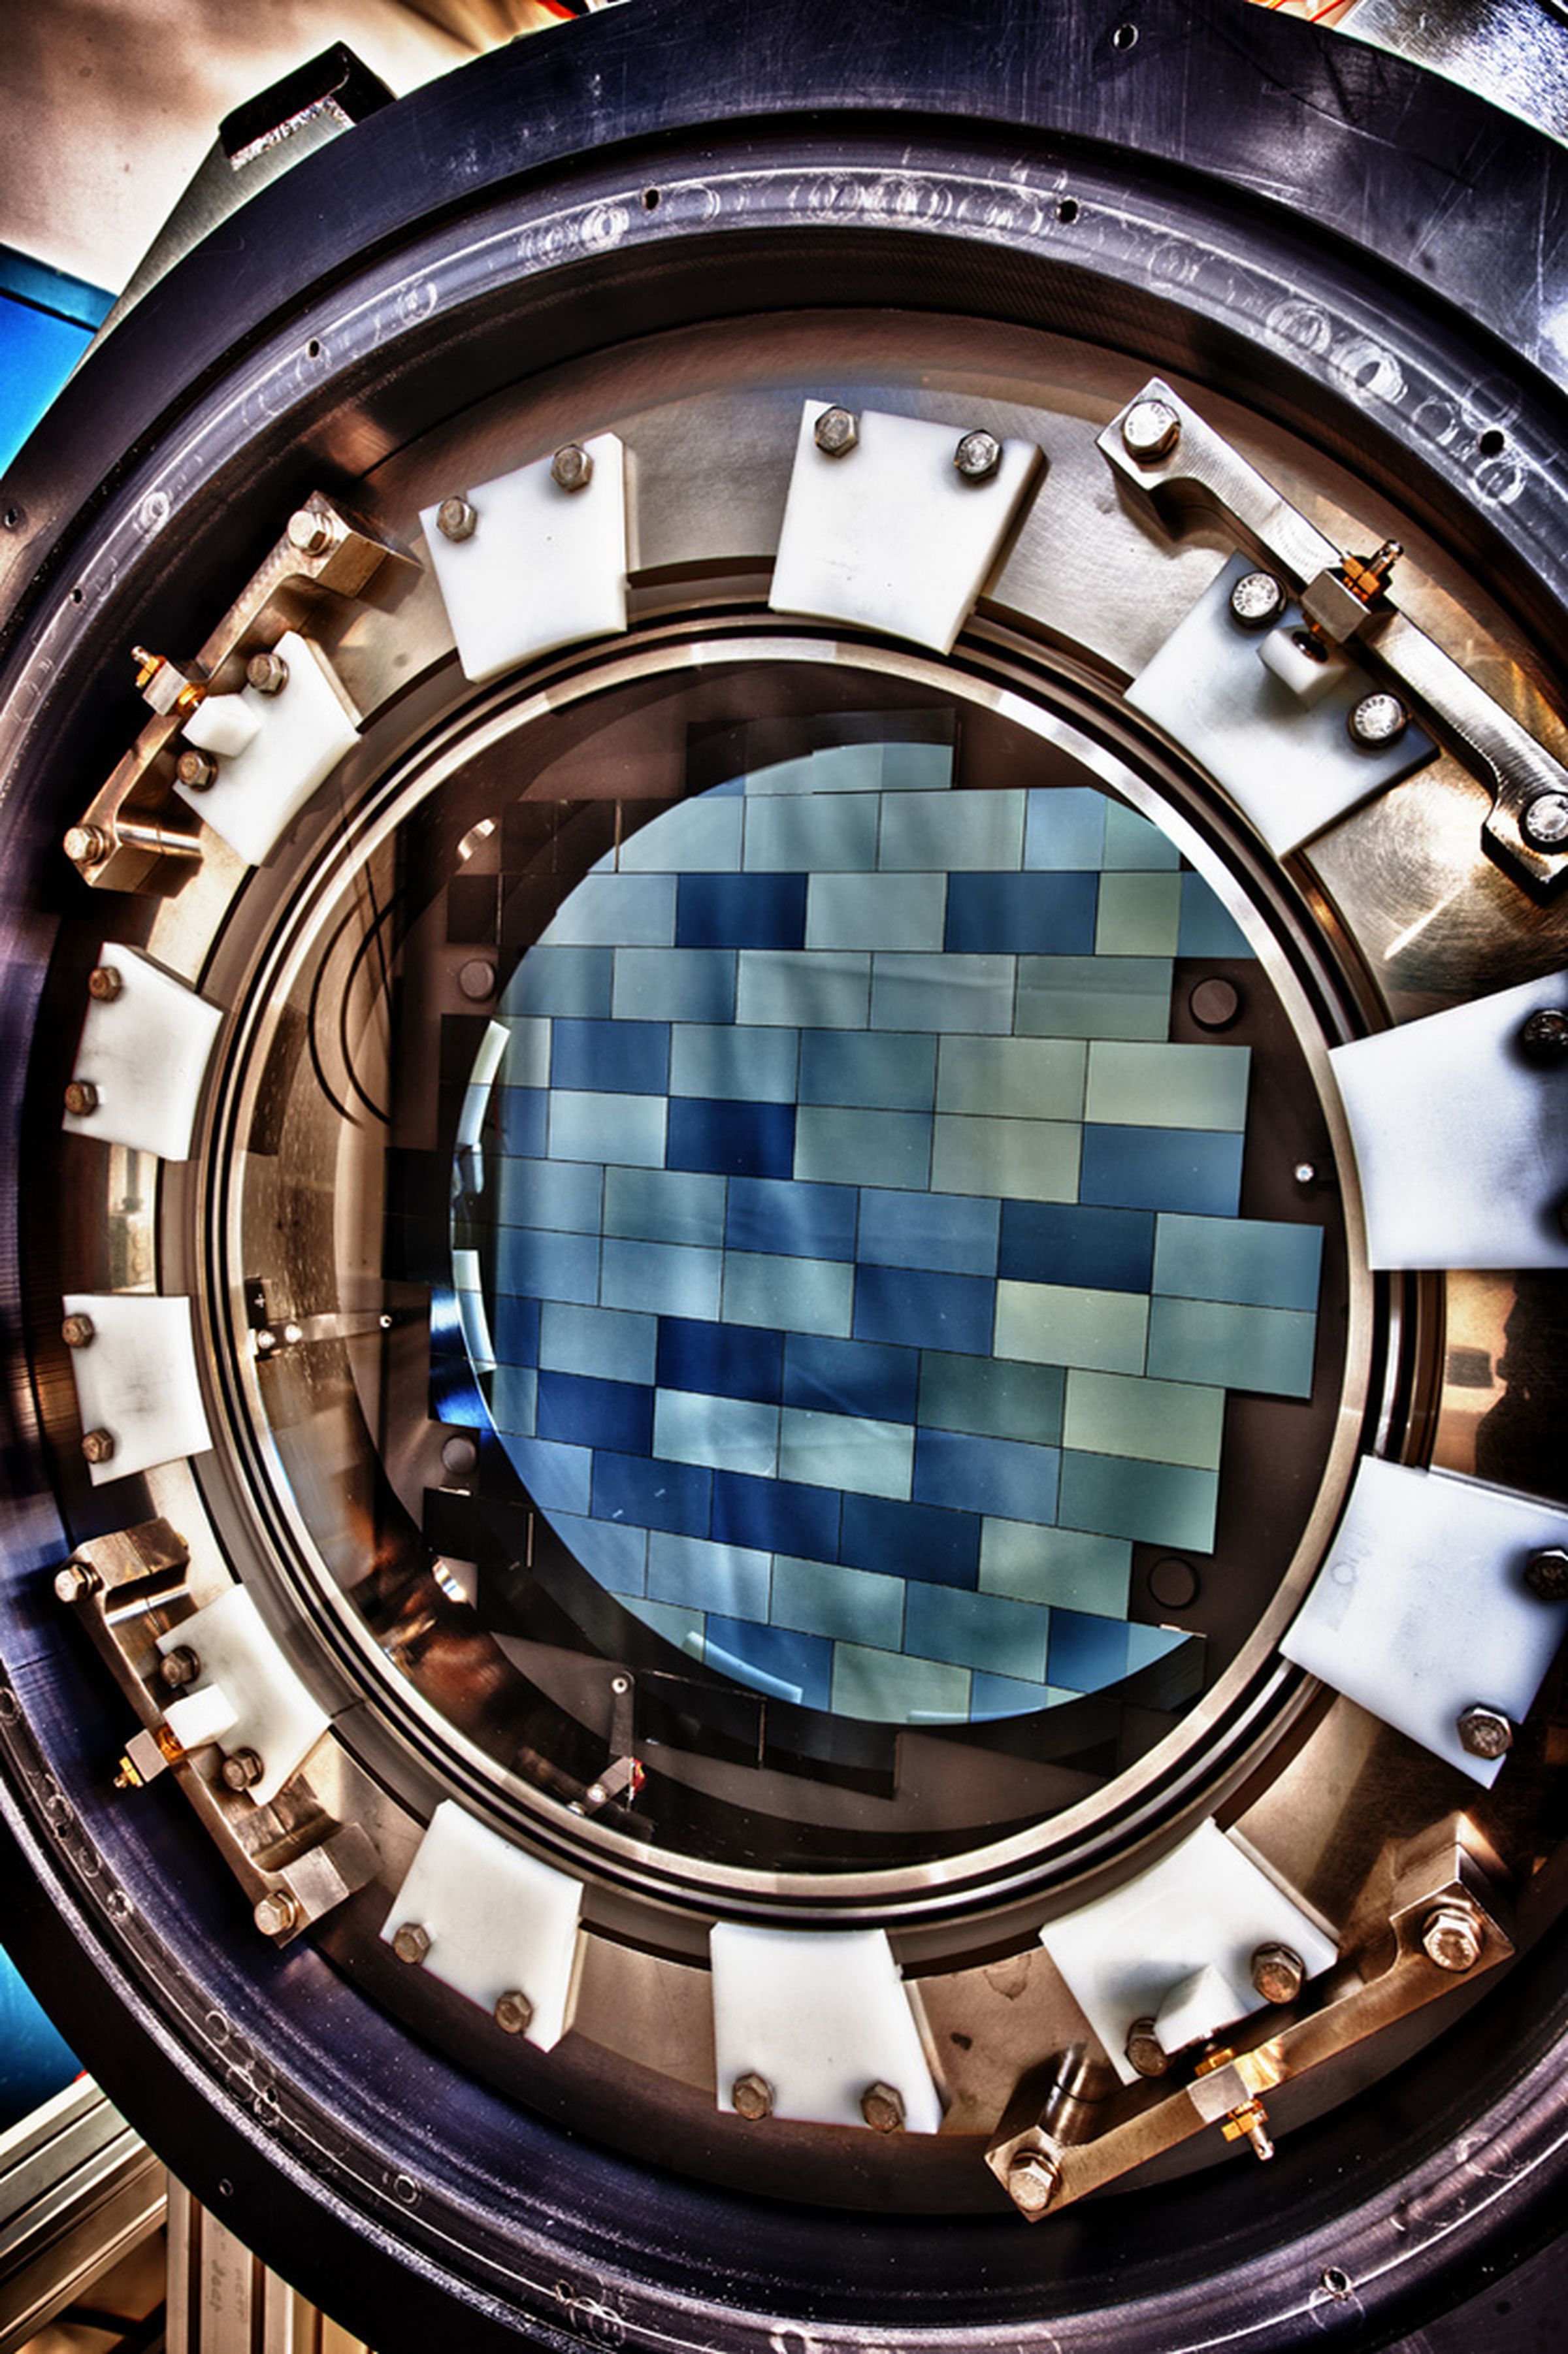 First images from the 570-megapixel Dark Energy Camera (Fermilab)